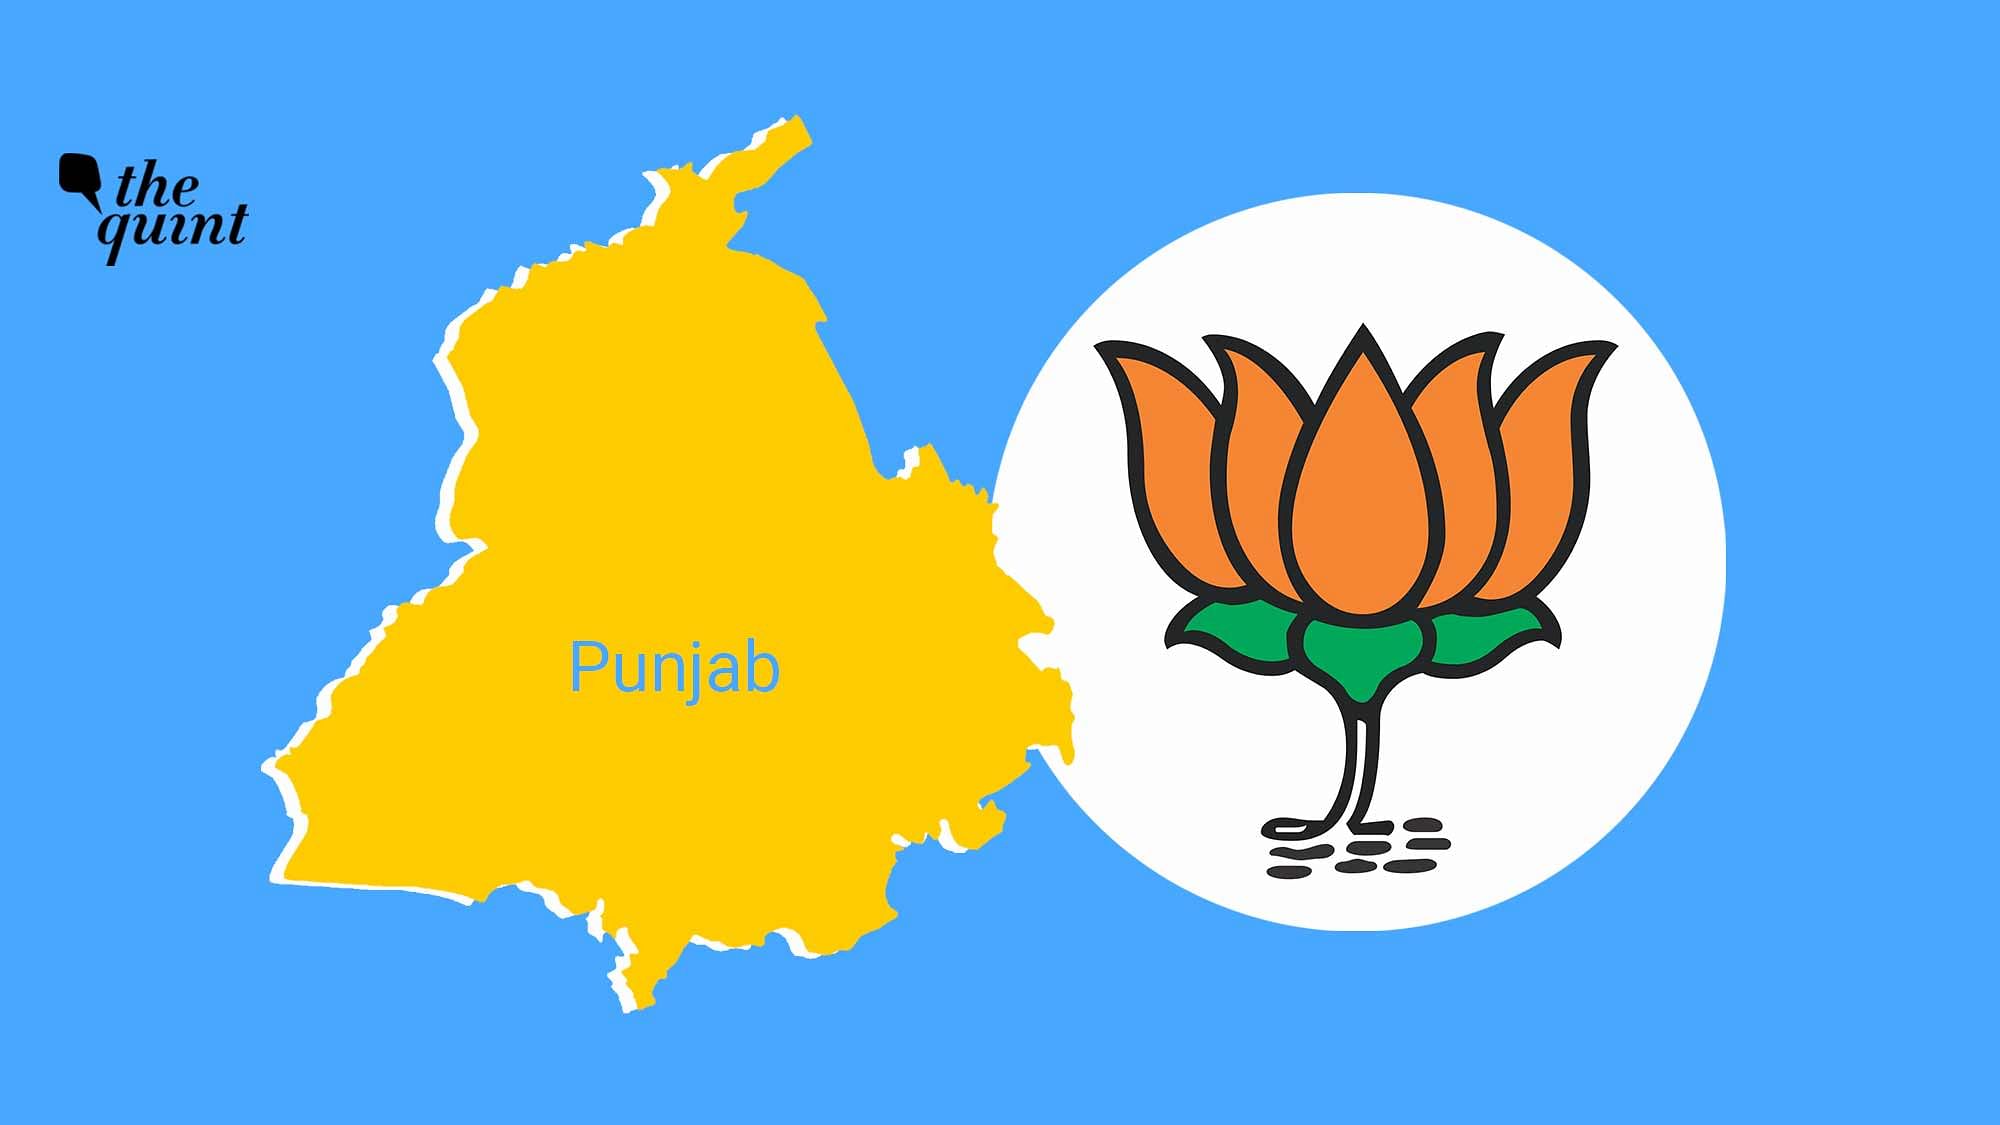 BJP is facing a backlash in Punjab due to farmers’ anger against the Modi government’s new farm legislations